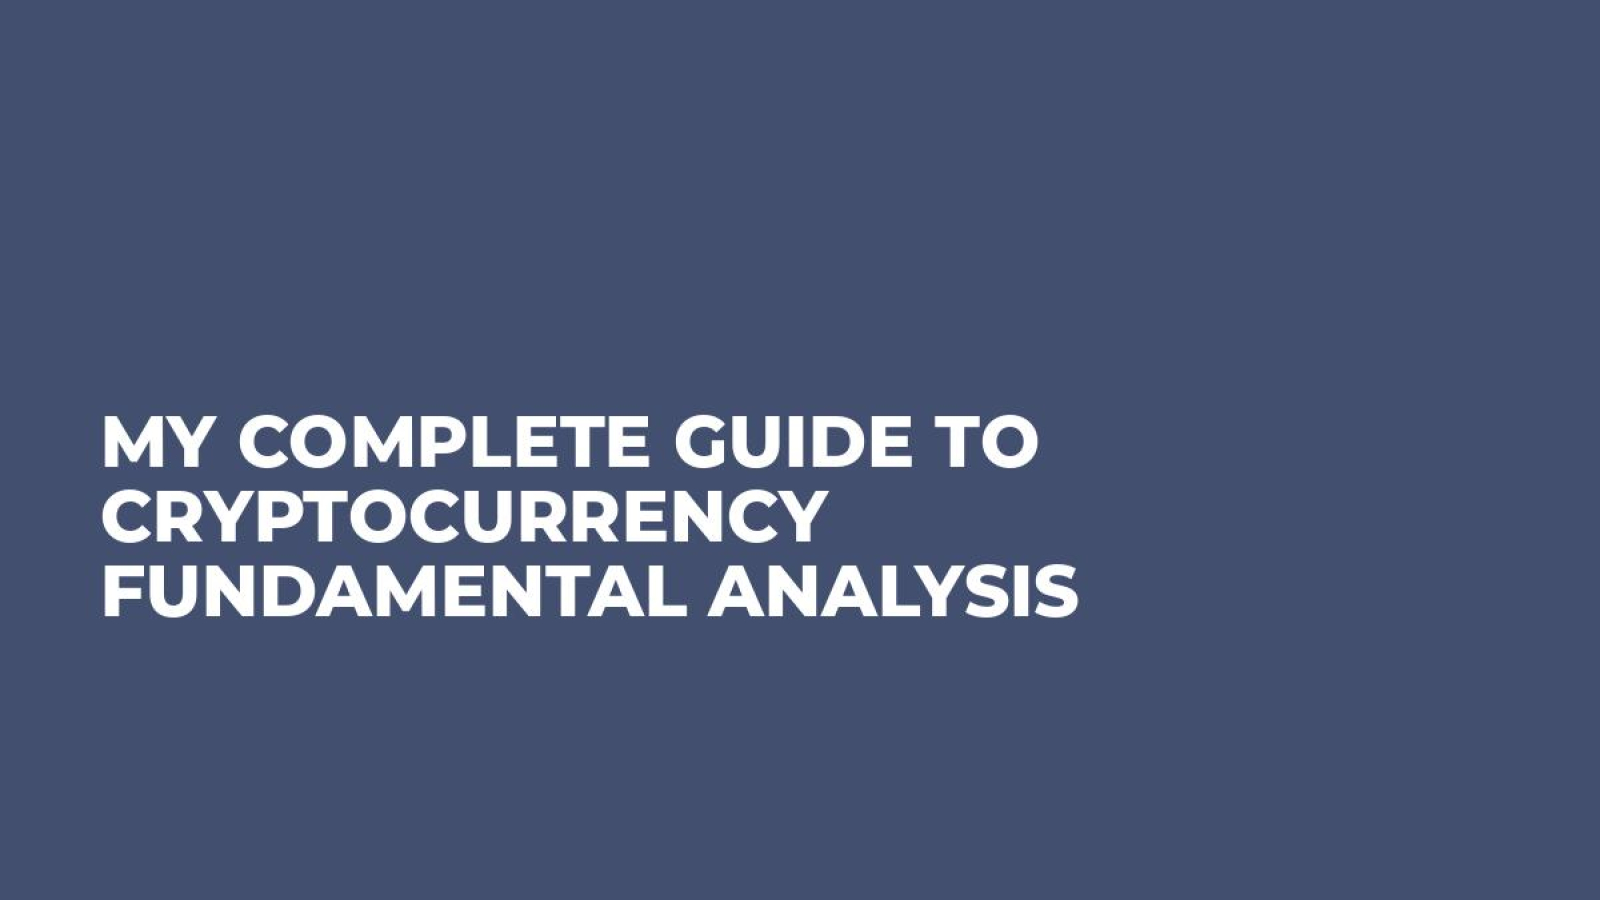 My Complete Guide to Cryptocurrency Fundamental Analysis